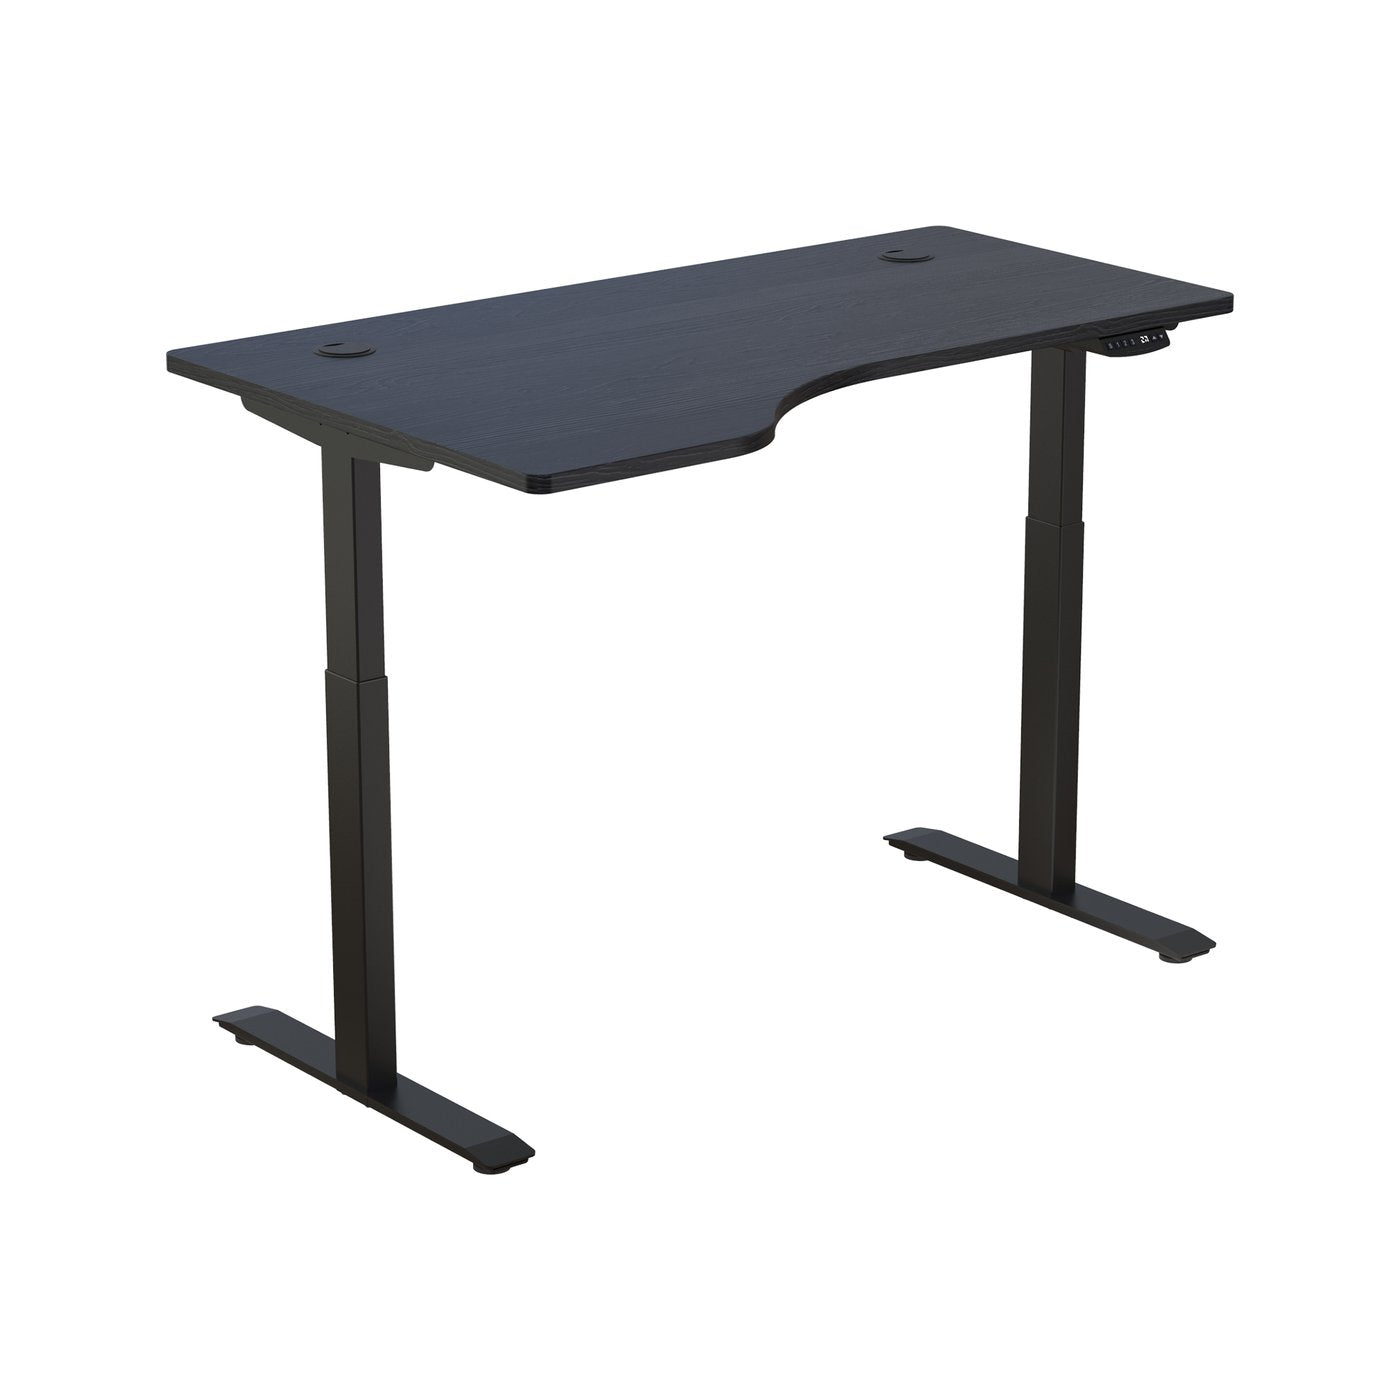 Hi5 Electric Height Adjustable Right Handed Standing Desks (55"x33") for Home Office Workstation with 4 Color Option